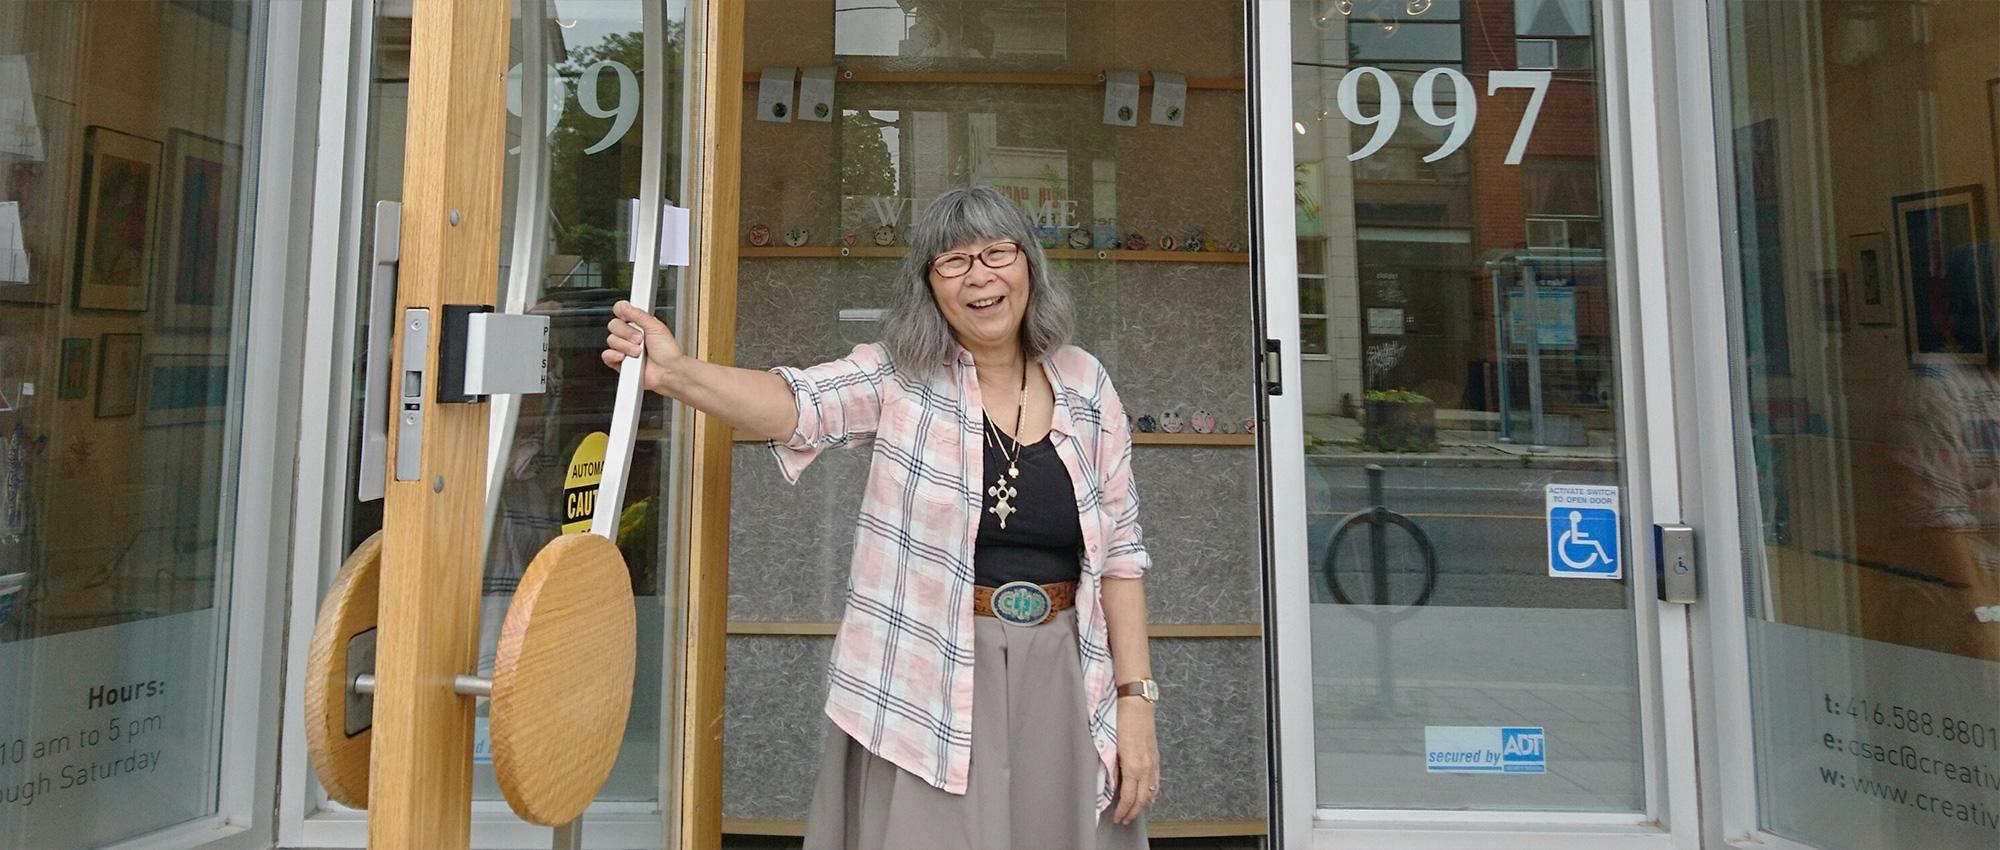 A woman smiles as she holds open the glass door to a building.